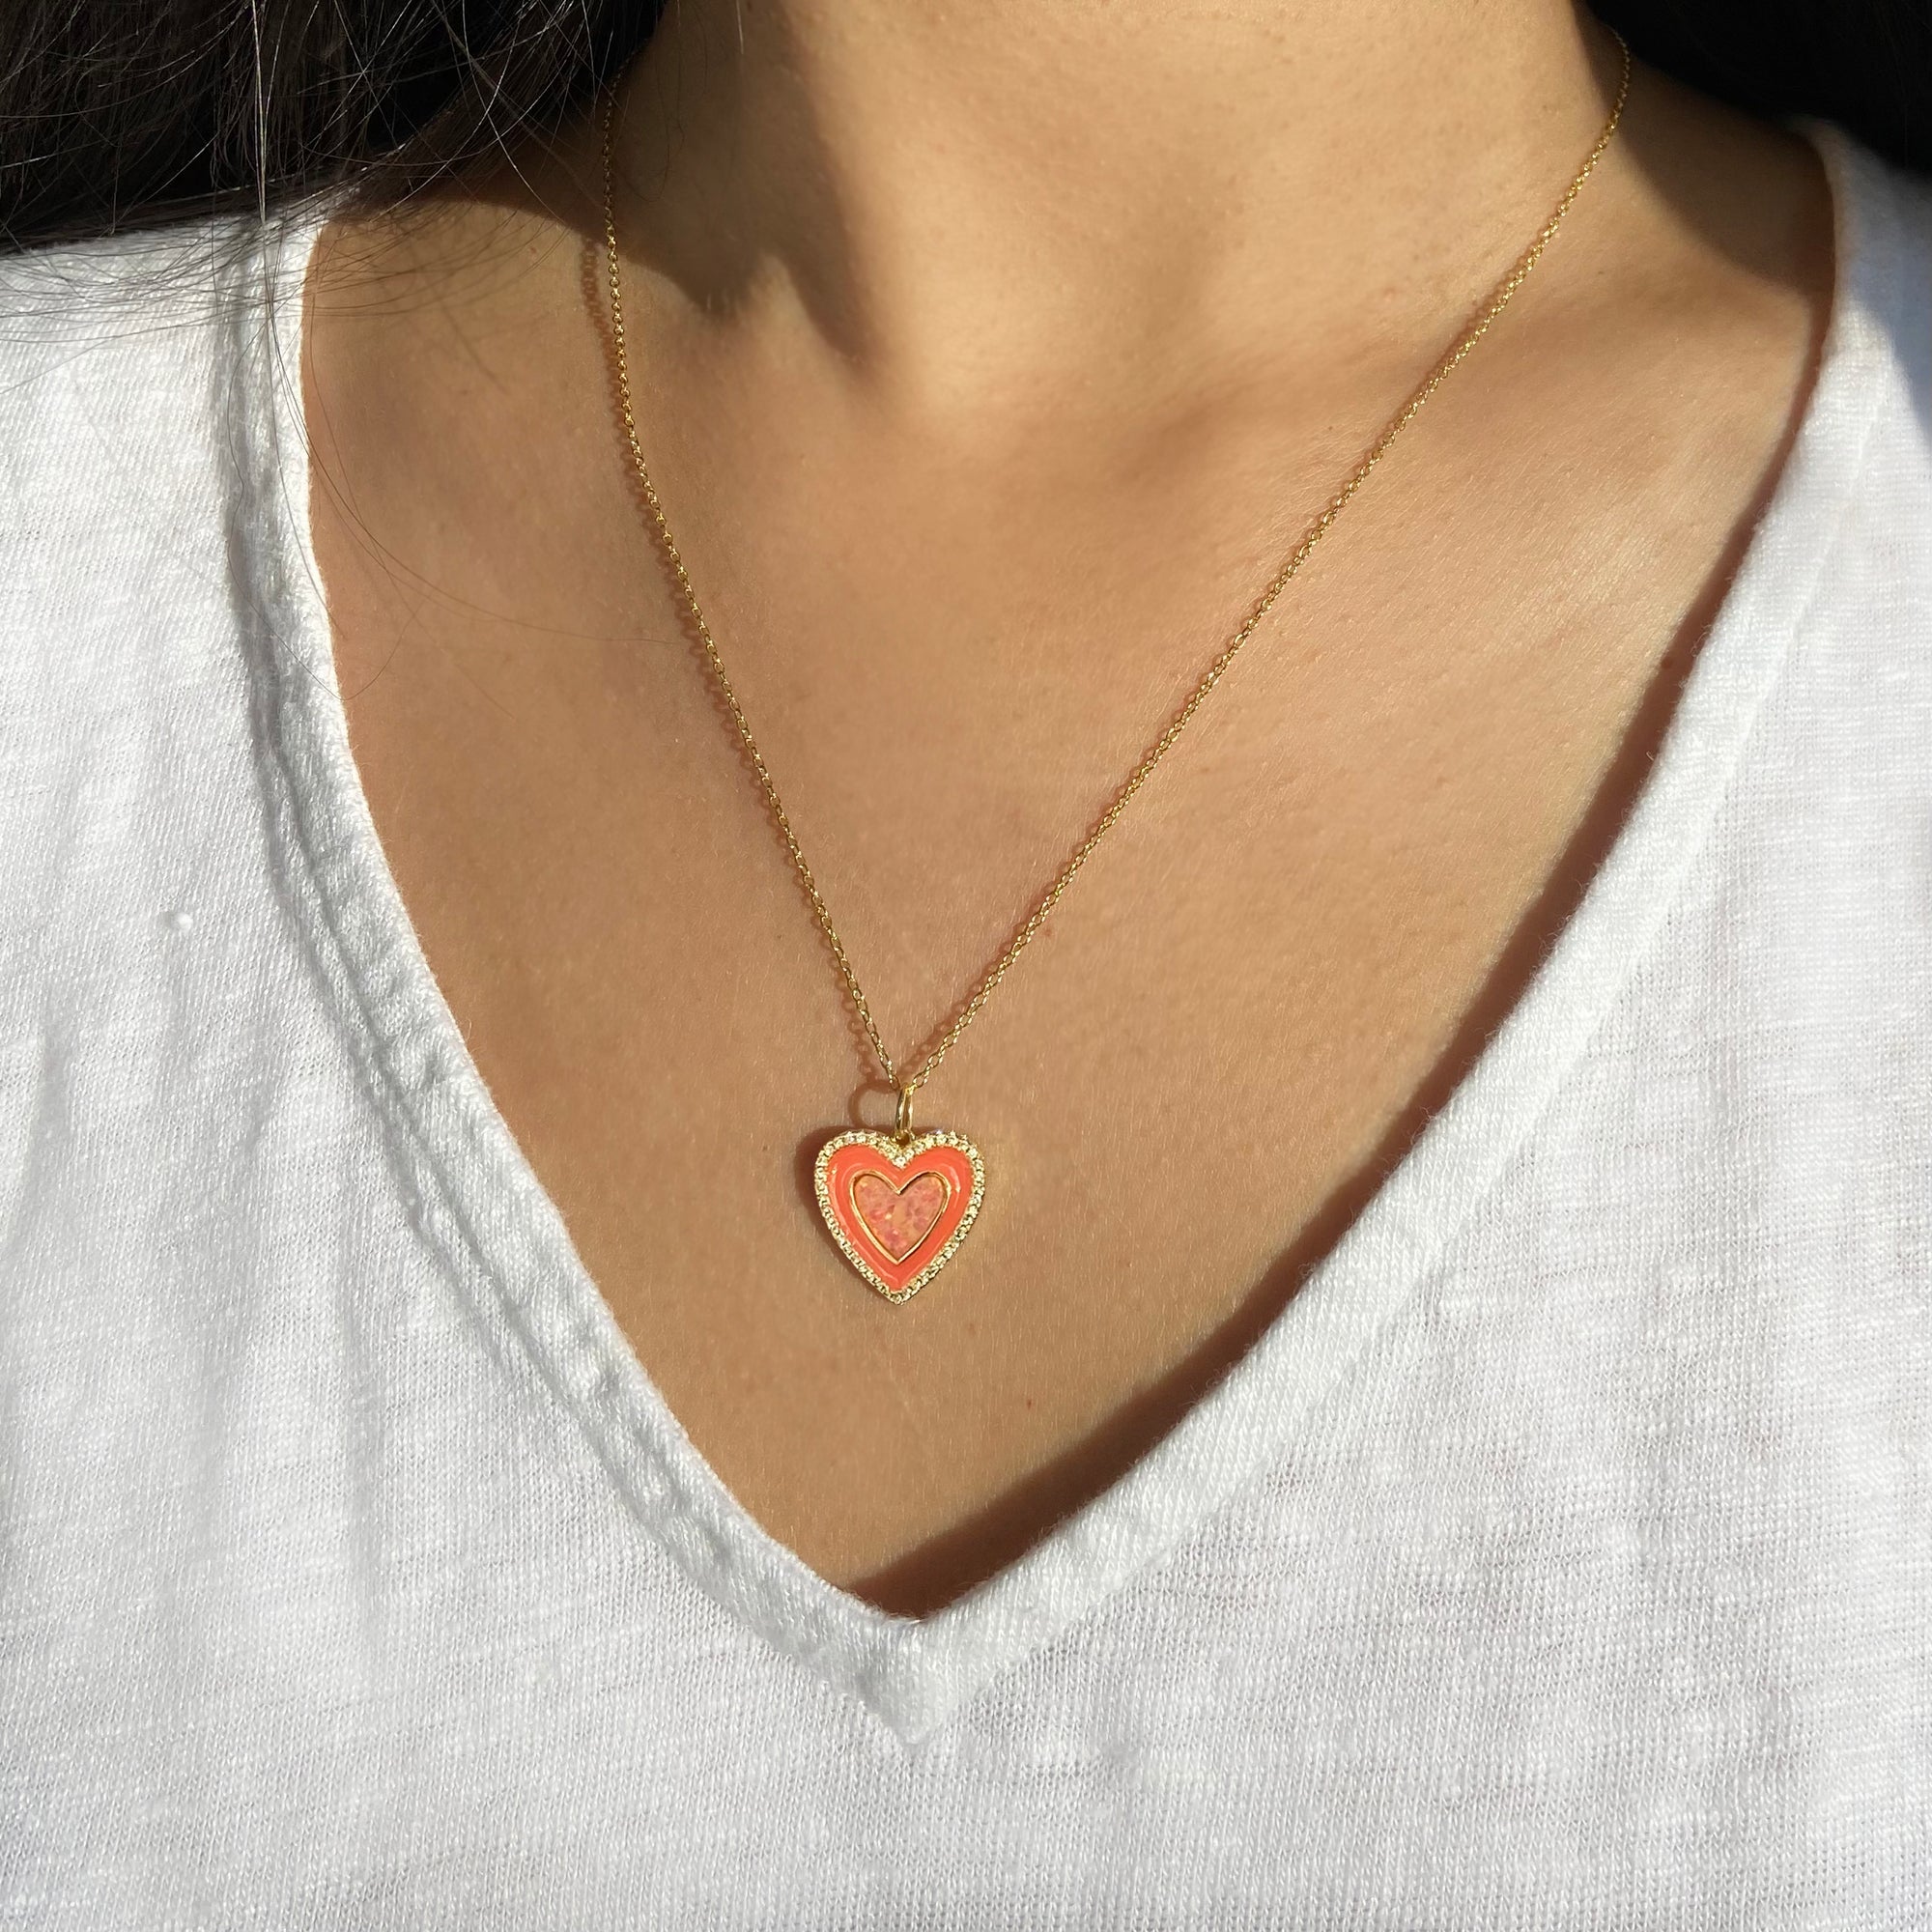 Two Tone Heart Necklace - Coral Enamel and Opal